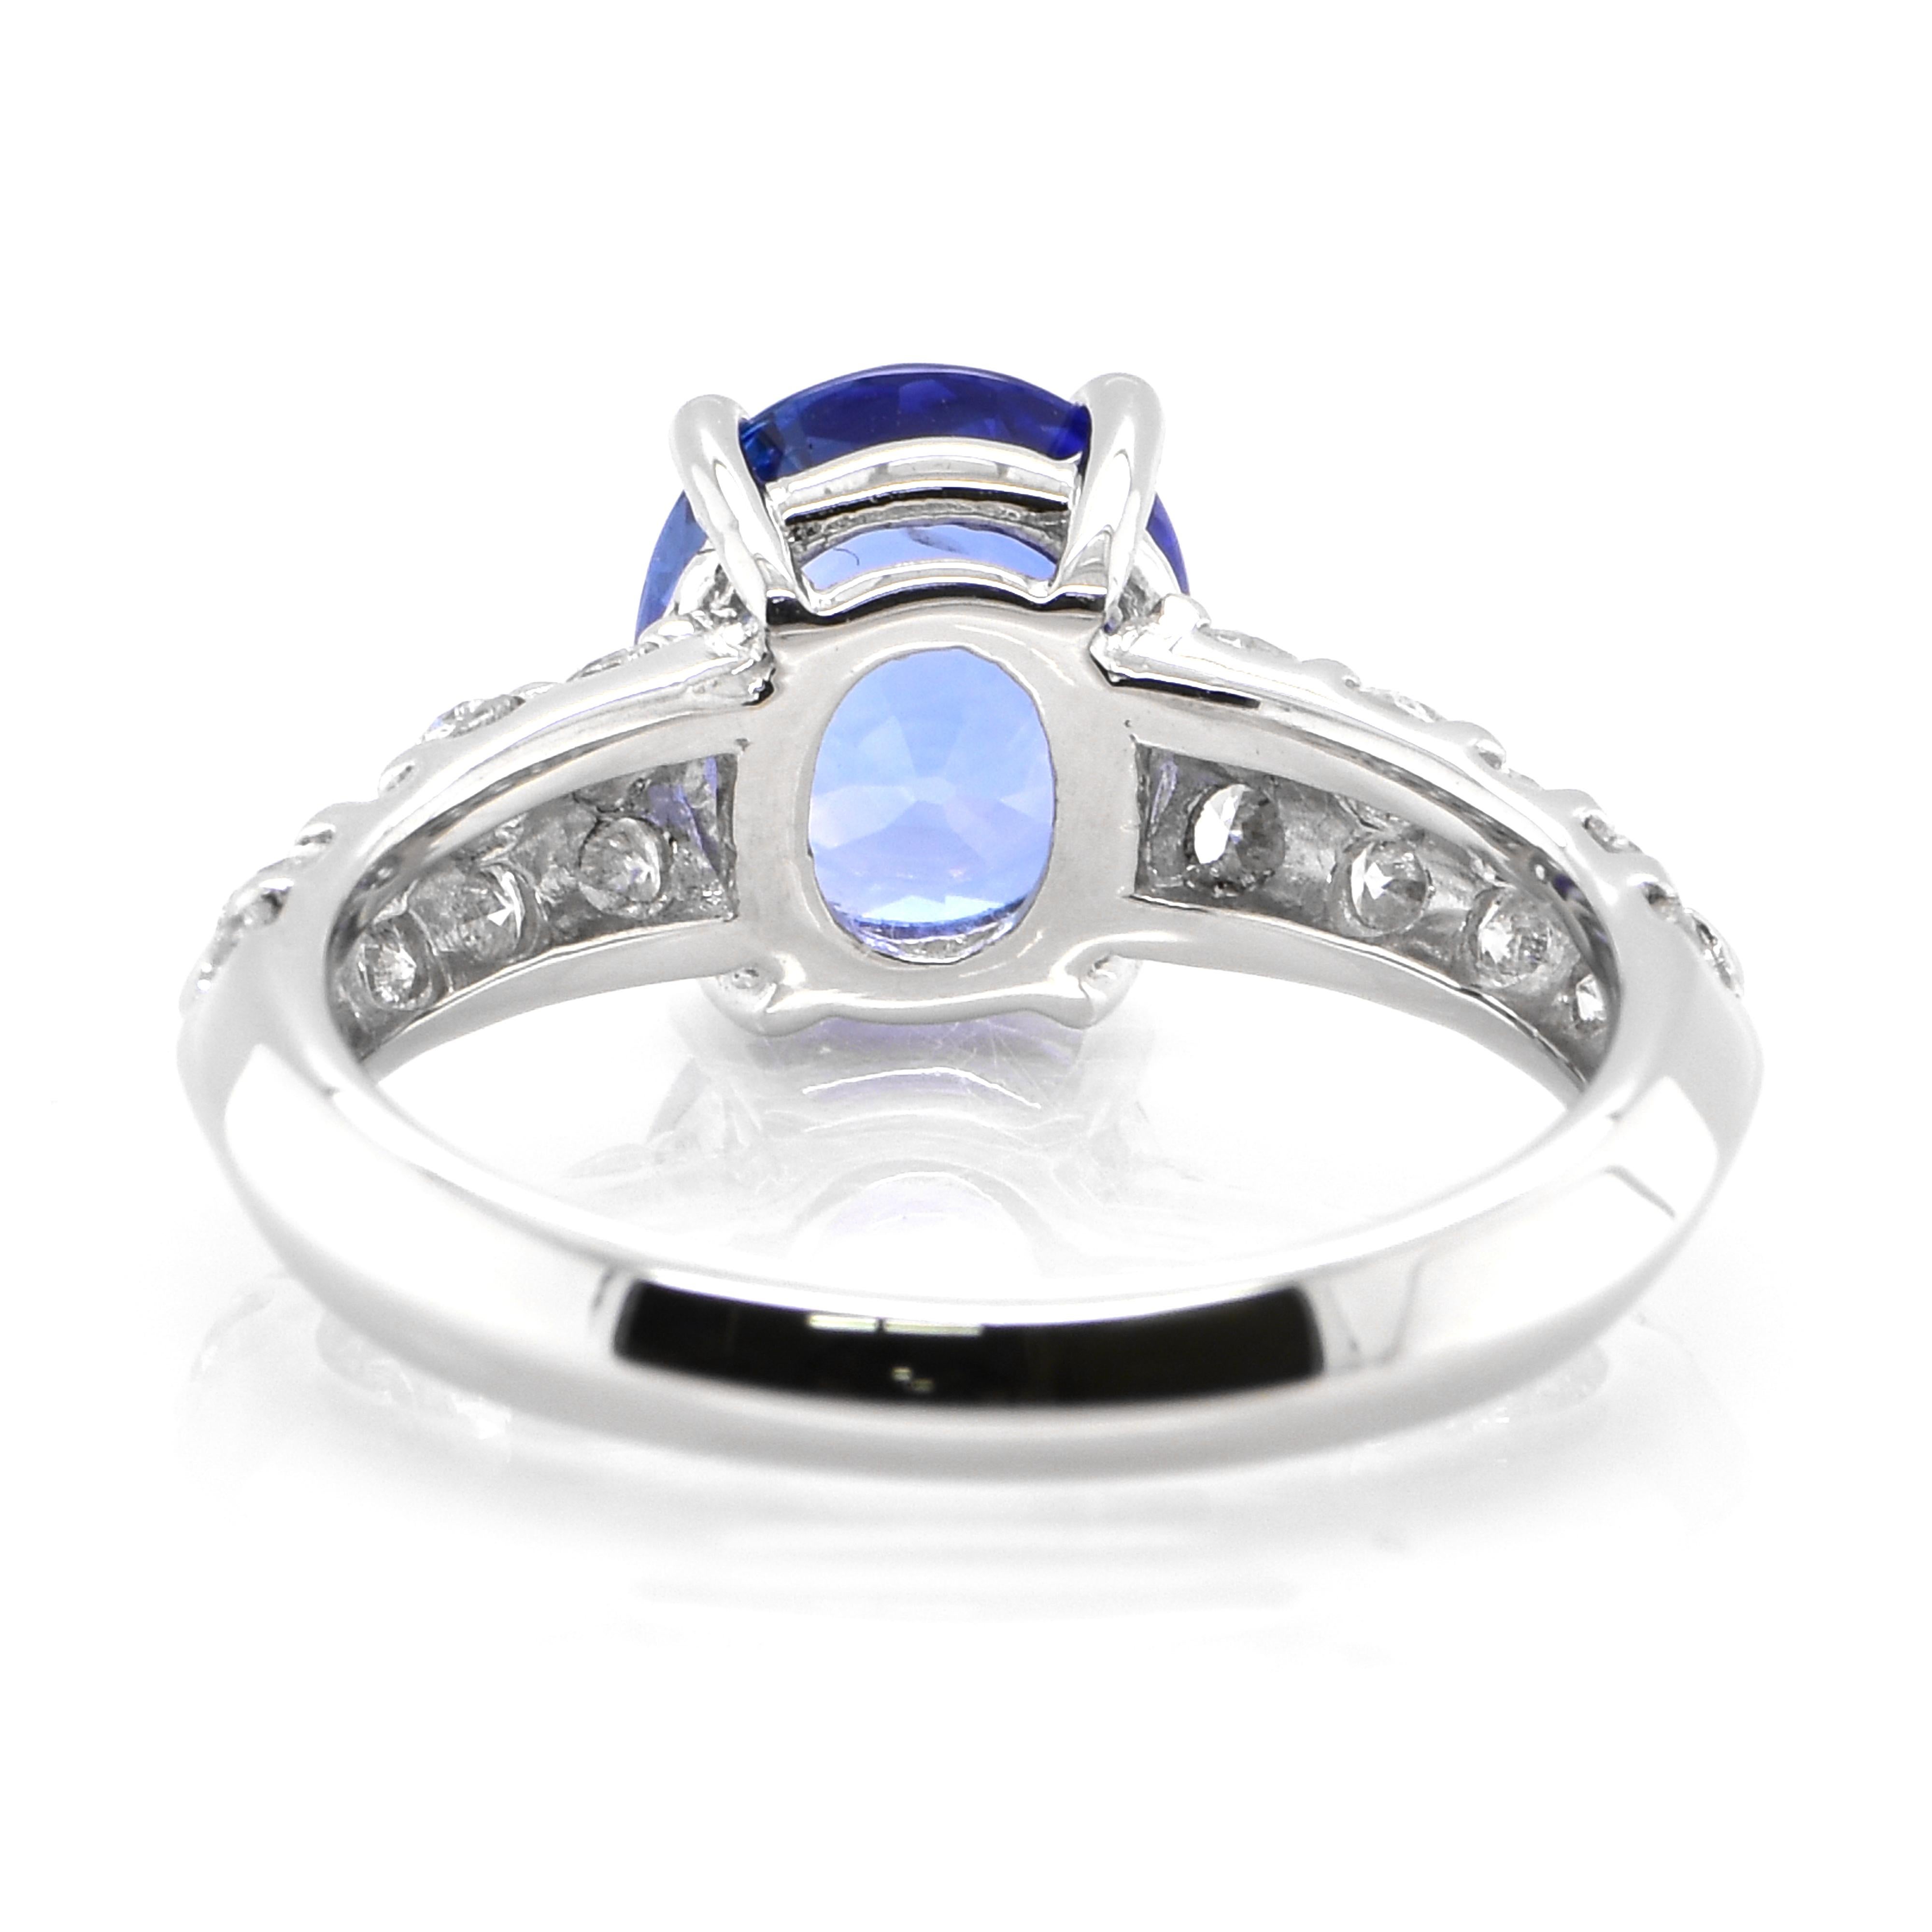 Women's 2.17 Carat Natural 'Cornflower Blue' Sapphire and Diamond Made in Platinum For Sale